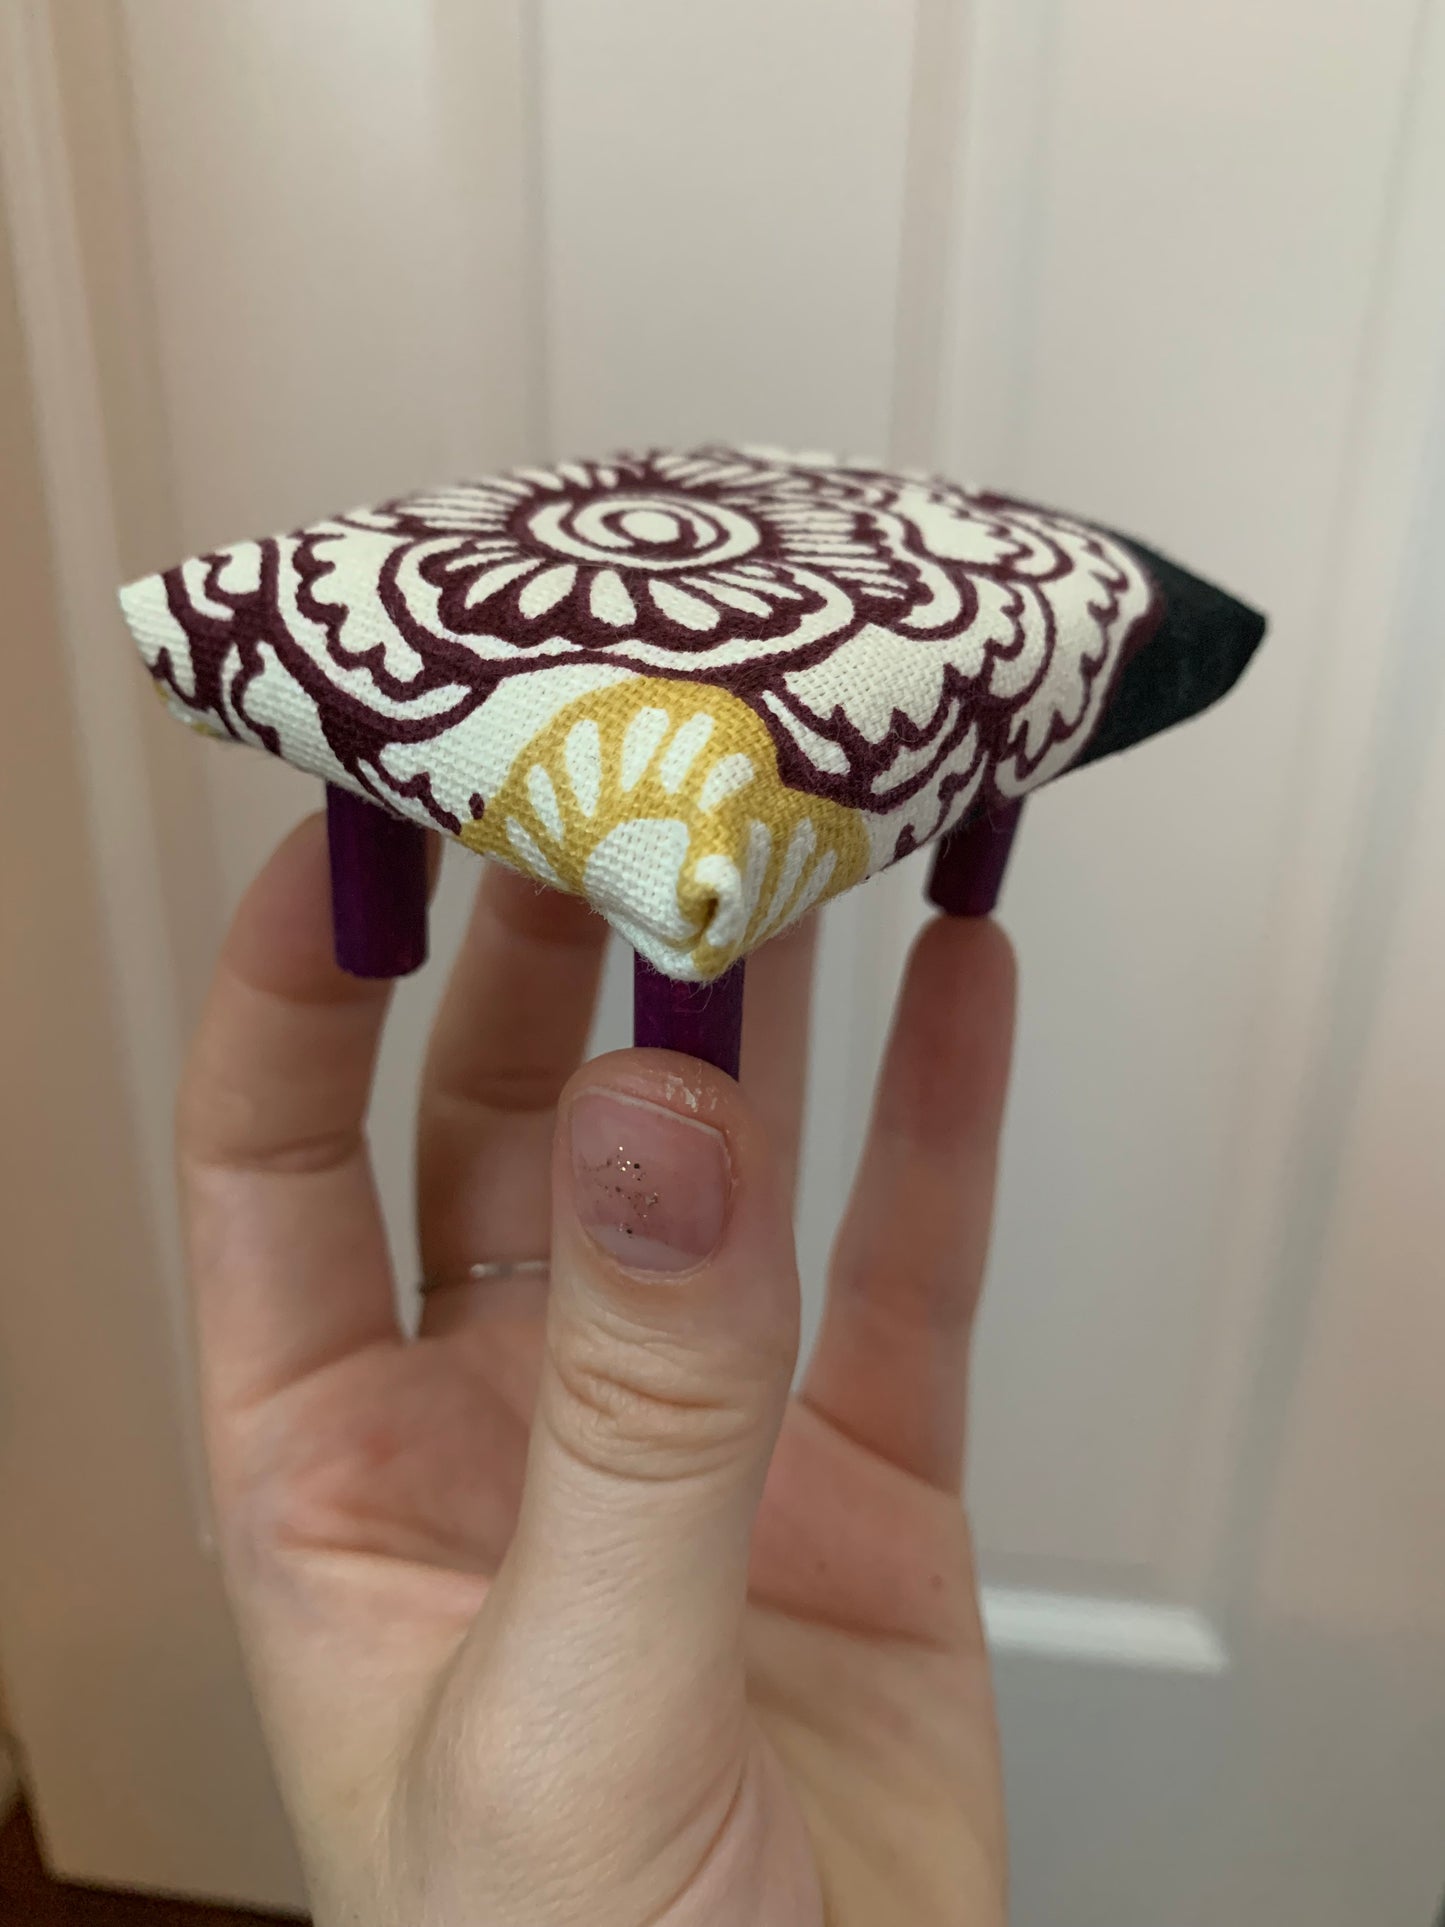 a miniature dollhouse ottoman, held in a hand for scale. This one is white with floral design, and dark purple legs